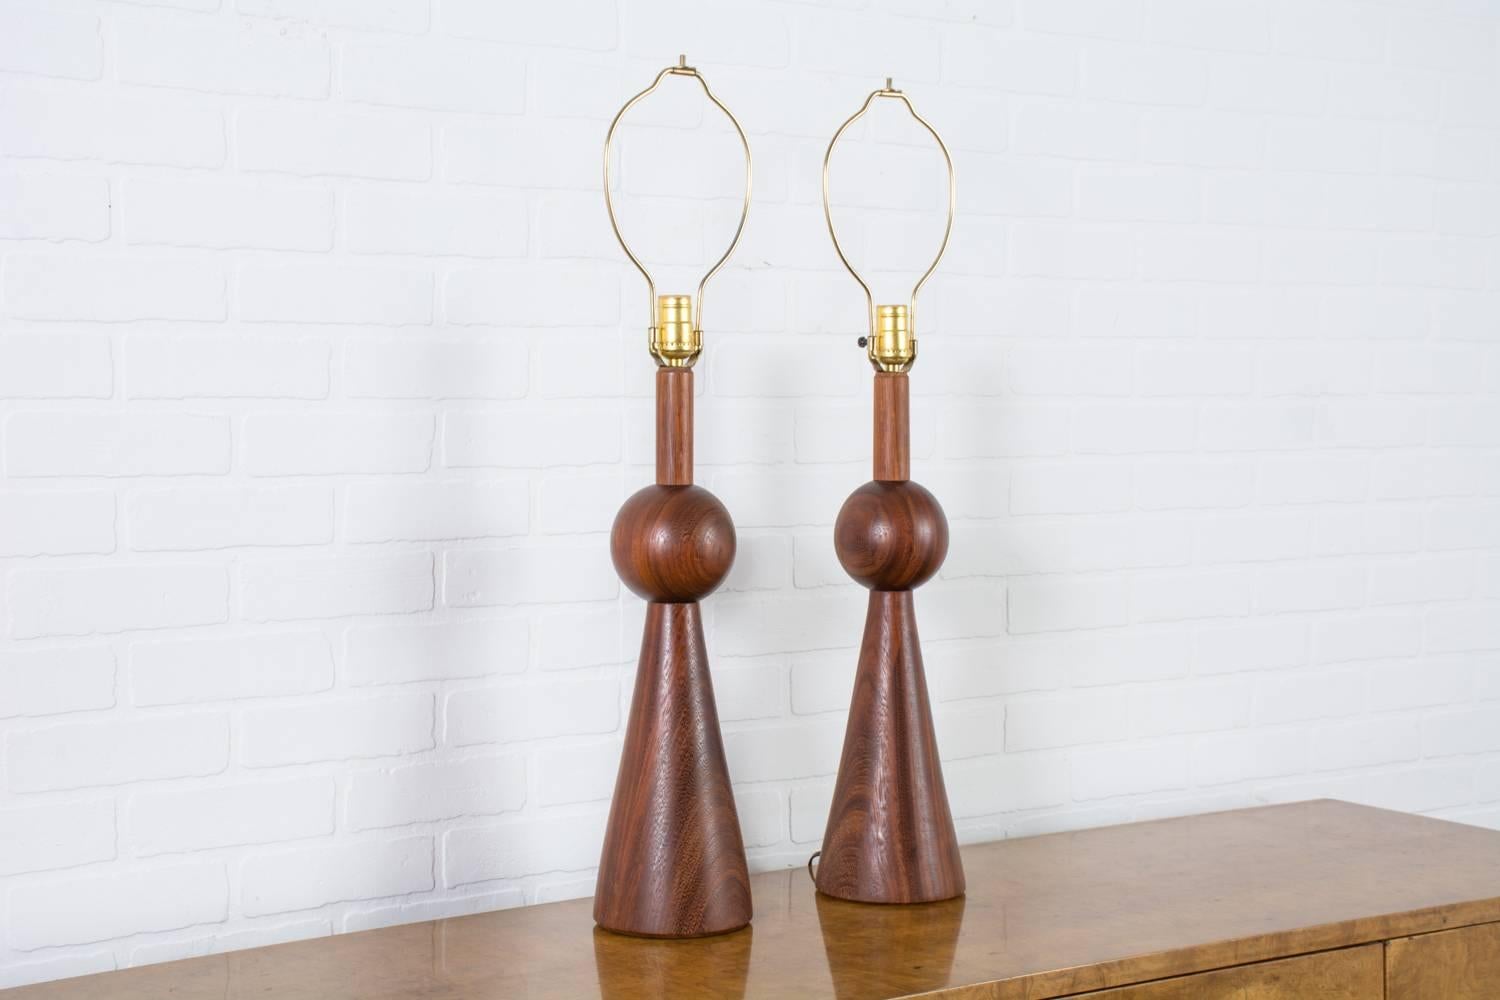 This is a pair of Mid-Century Modern geometric walnut table lamps. They measure 20.5 inches H to the top of the sculptural wood bases and currently have 10 inch high harps.